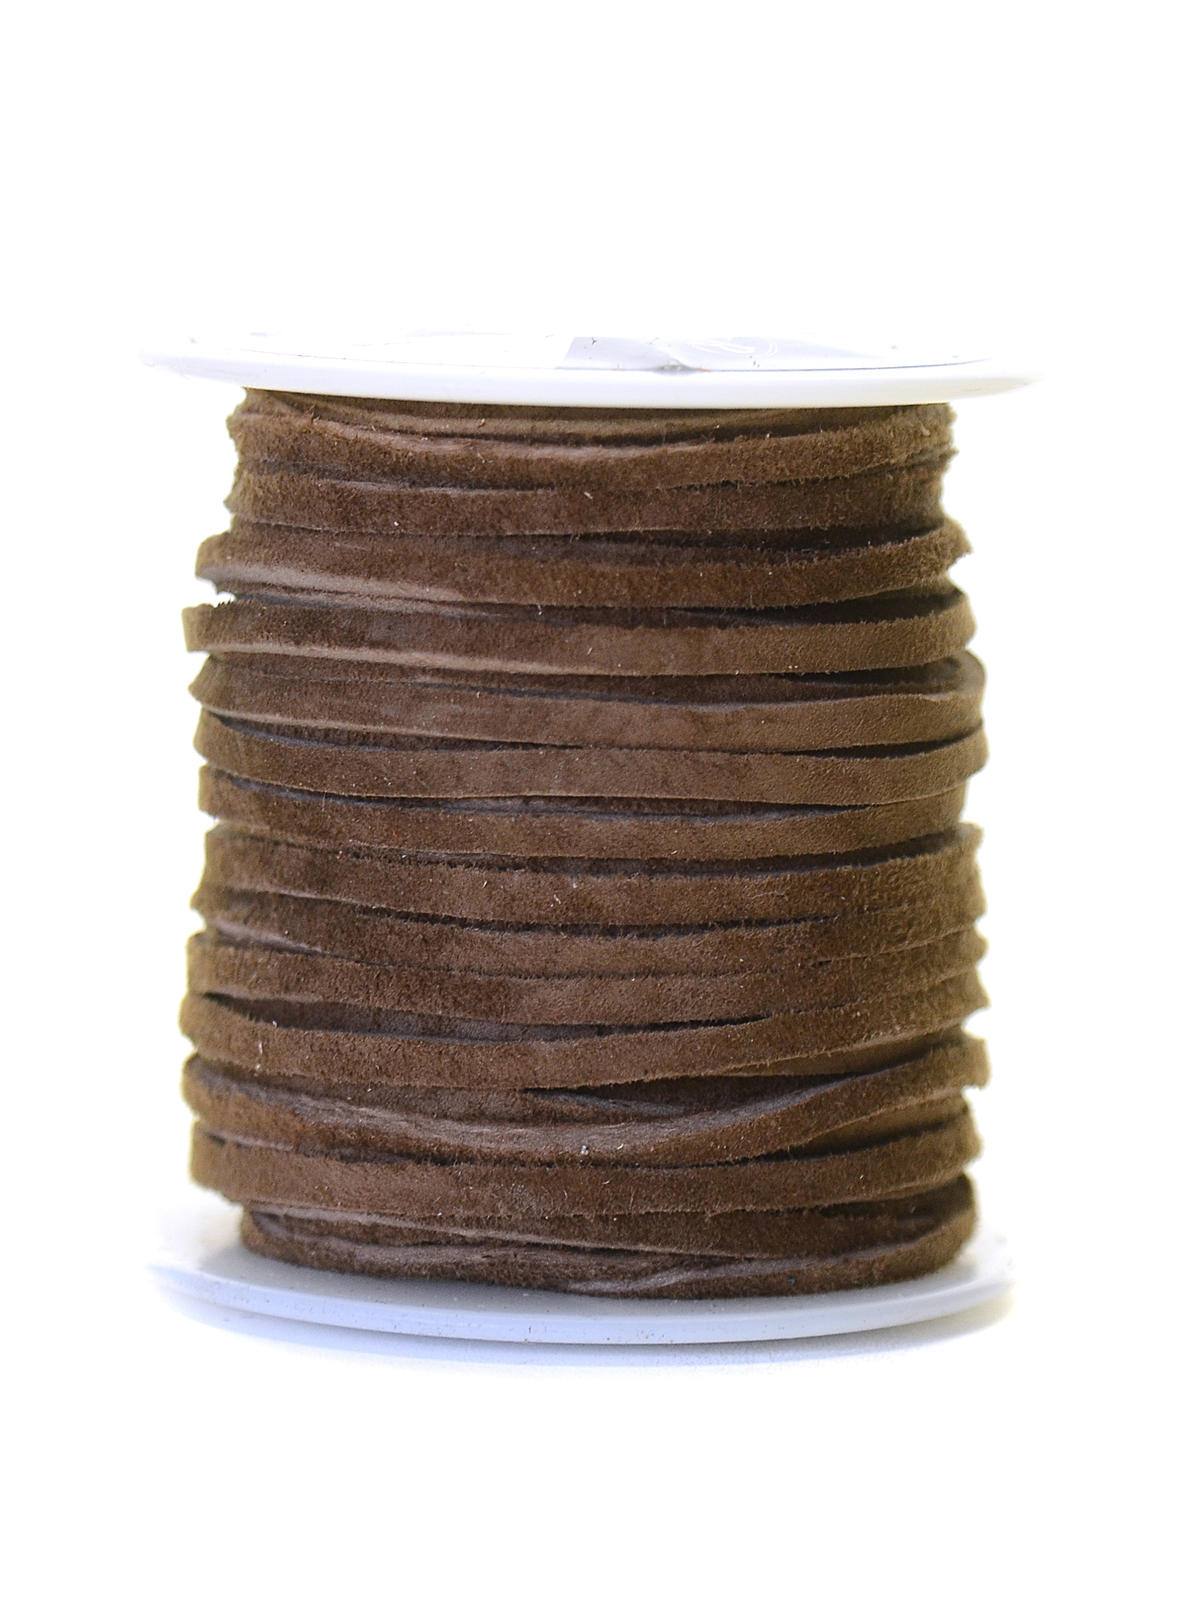 Realeather Sof-suede Lace Spool 3 32 In. X 50 Ft. Cafe